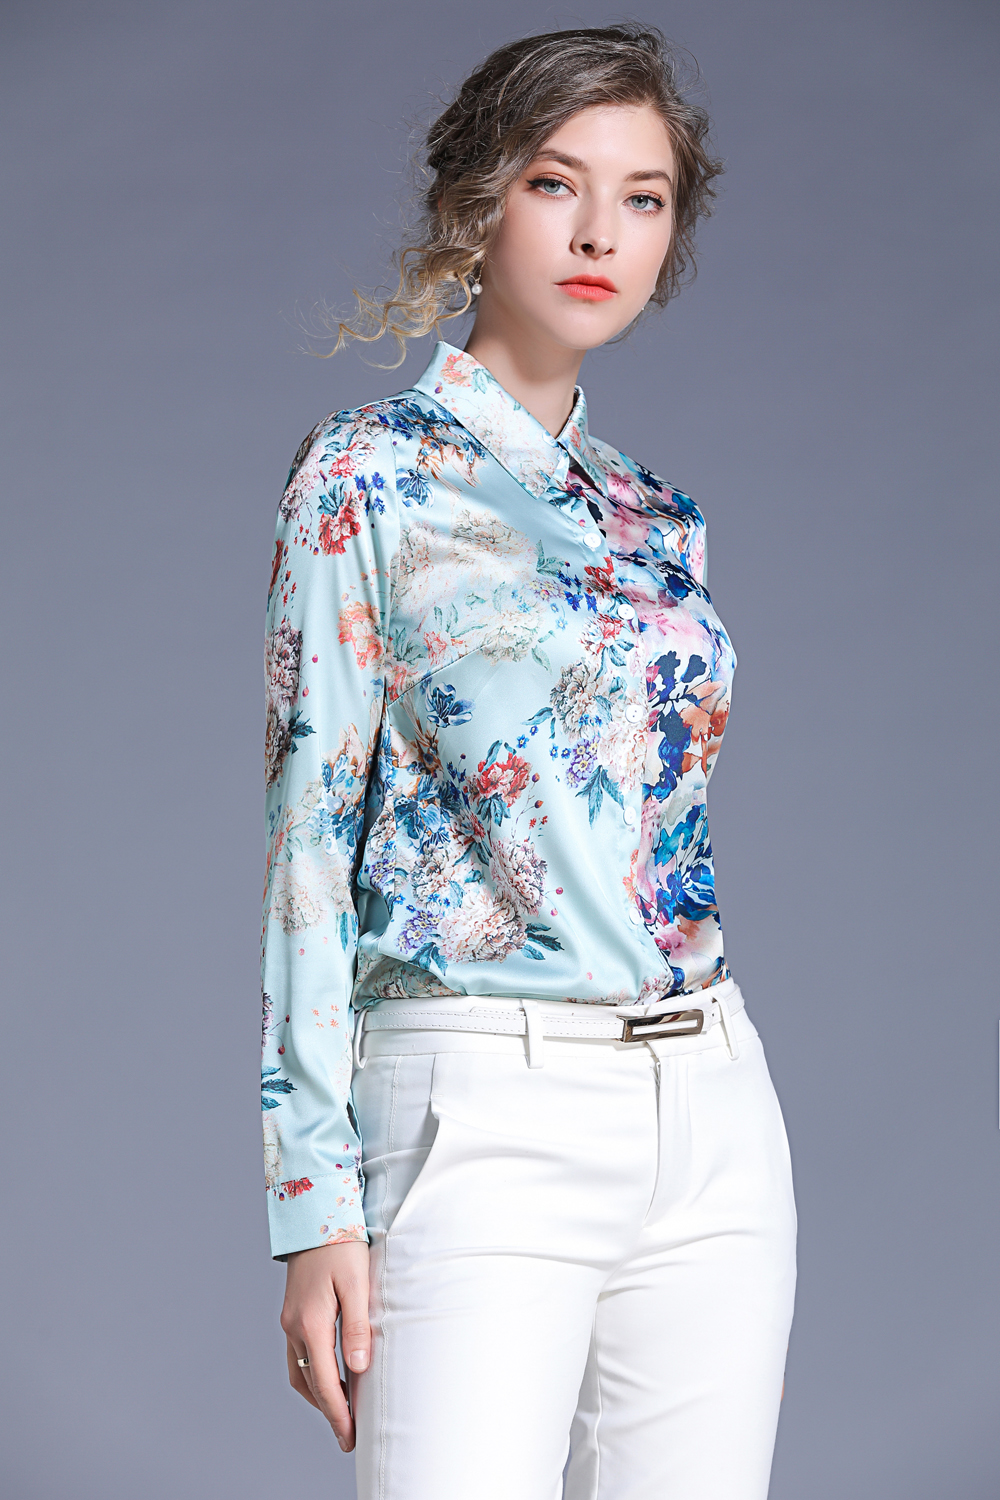 2020 Spring Summer Fall Runway Fashion Floral Print Collar Long Sleeve Button Front Womens Ladies Casual Office OL Party Tops Shirts Blouse от DHgate WW